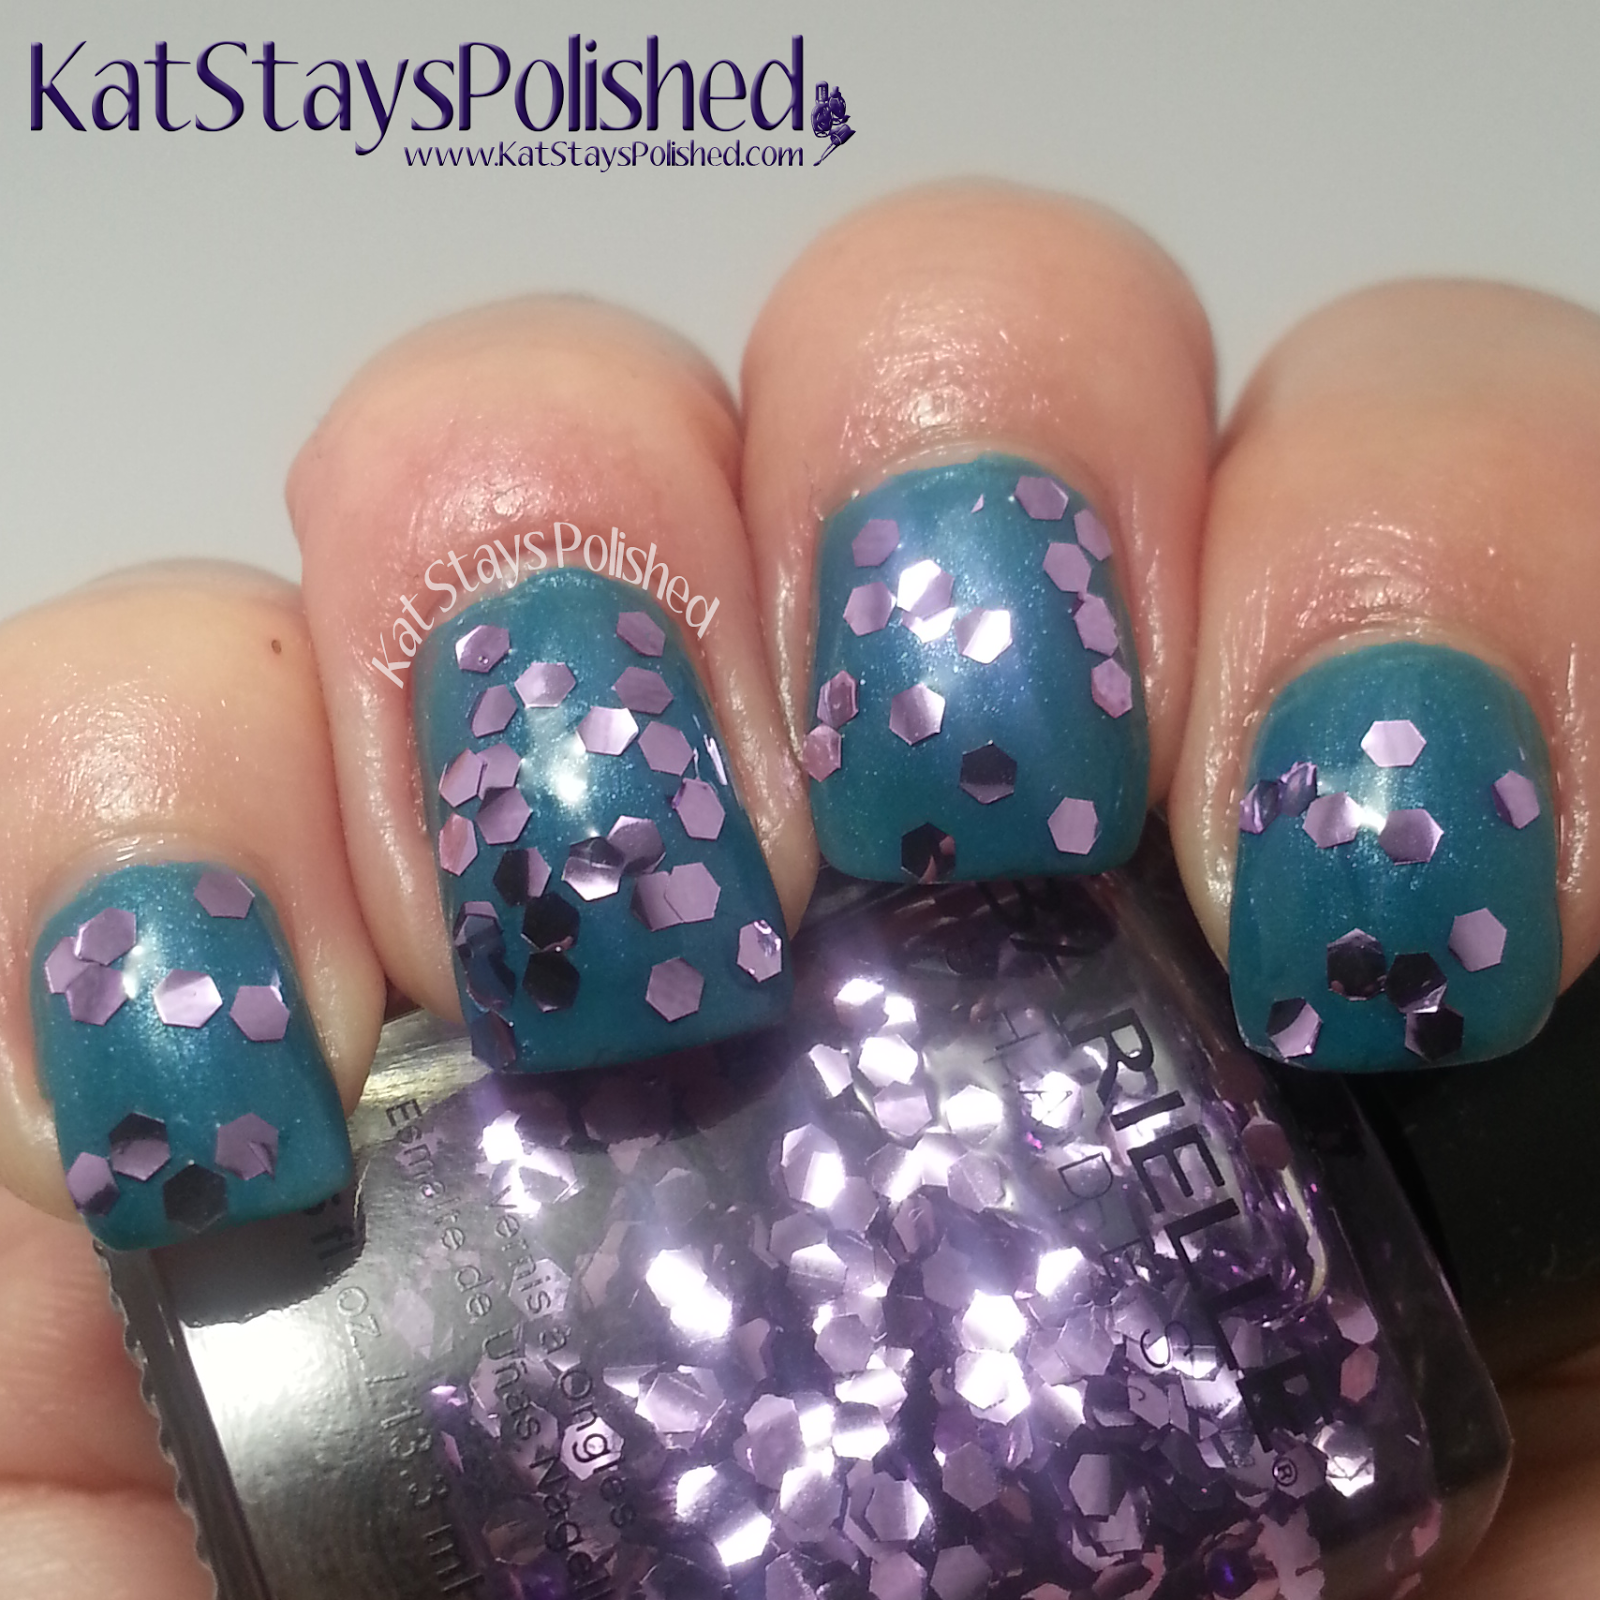 Barielle Bling It On - Amethyst over Under the Sea | Kat Stays Polished